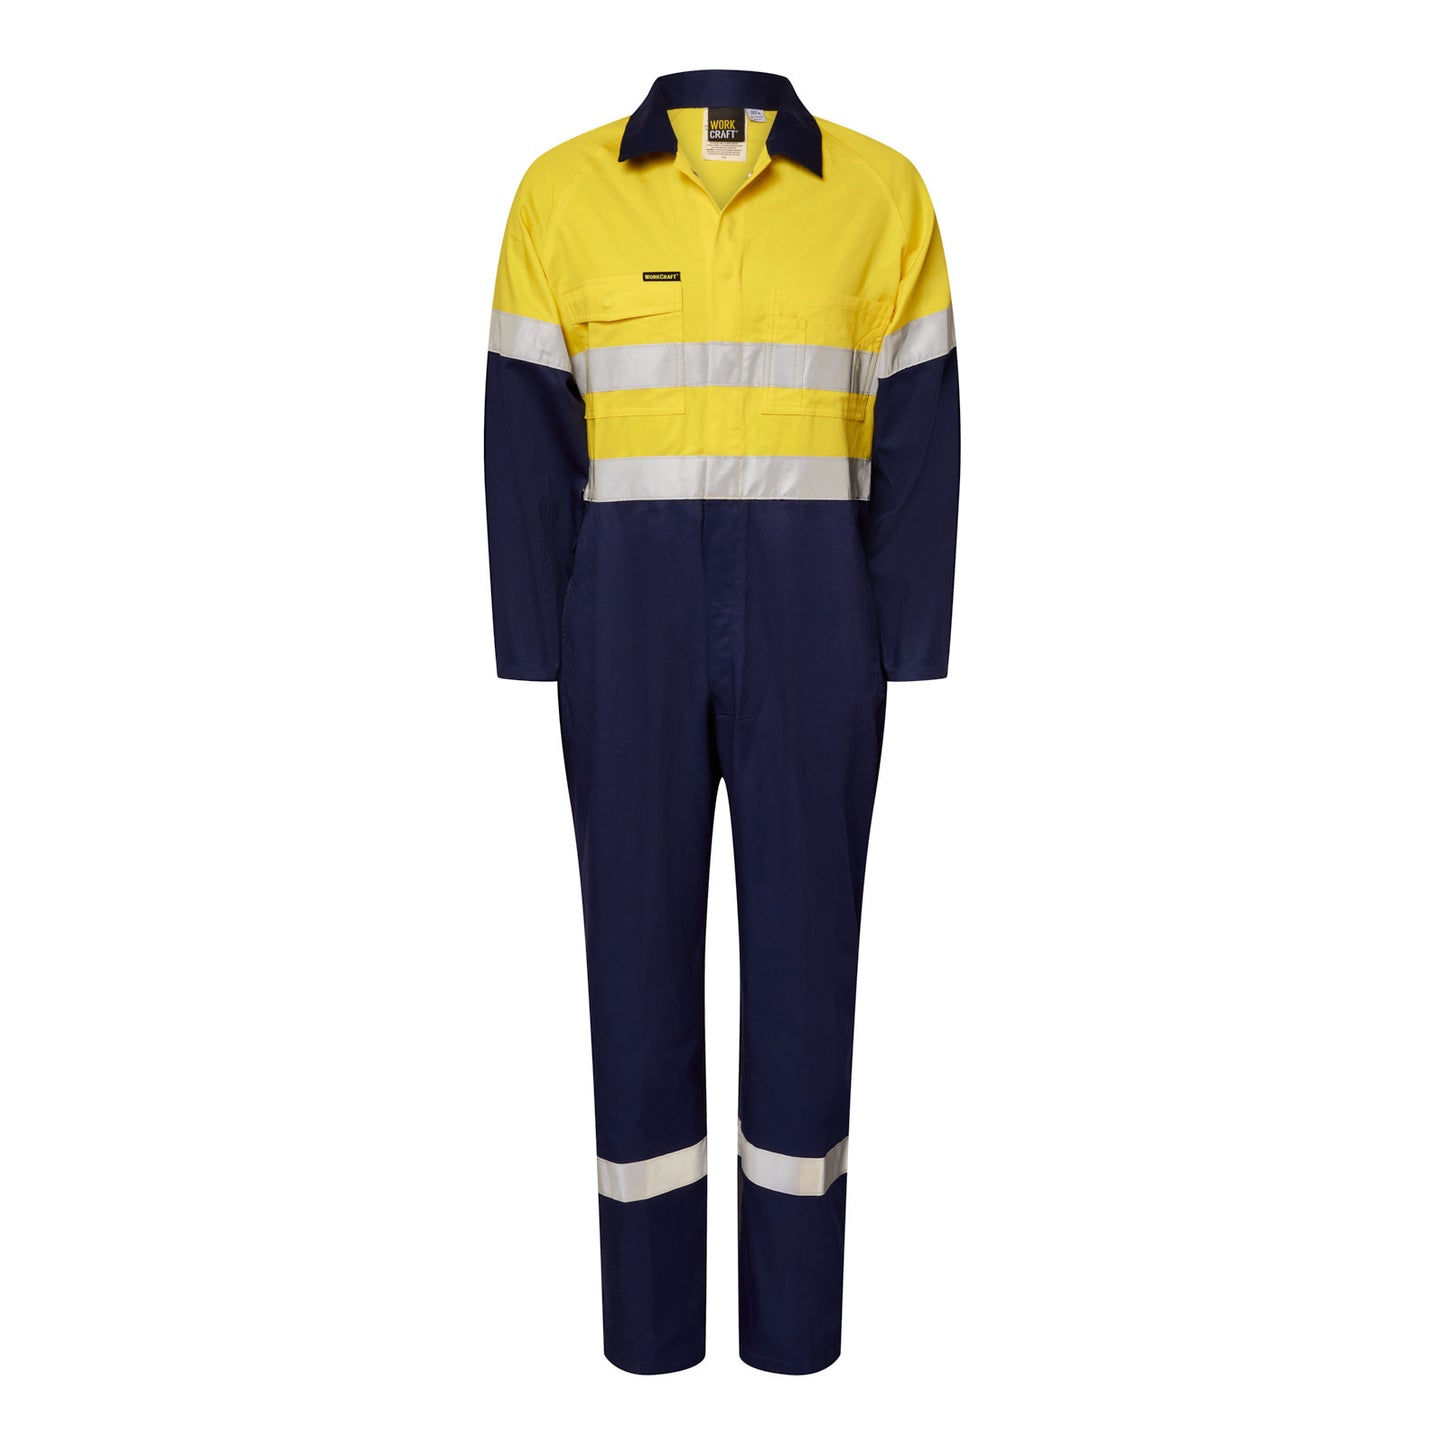 Day Night Hi Vis Light Cotton Twill Coveralls Reflective Tape - made by Workcraft